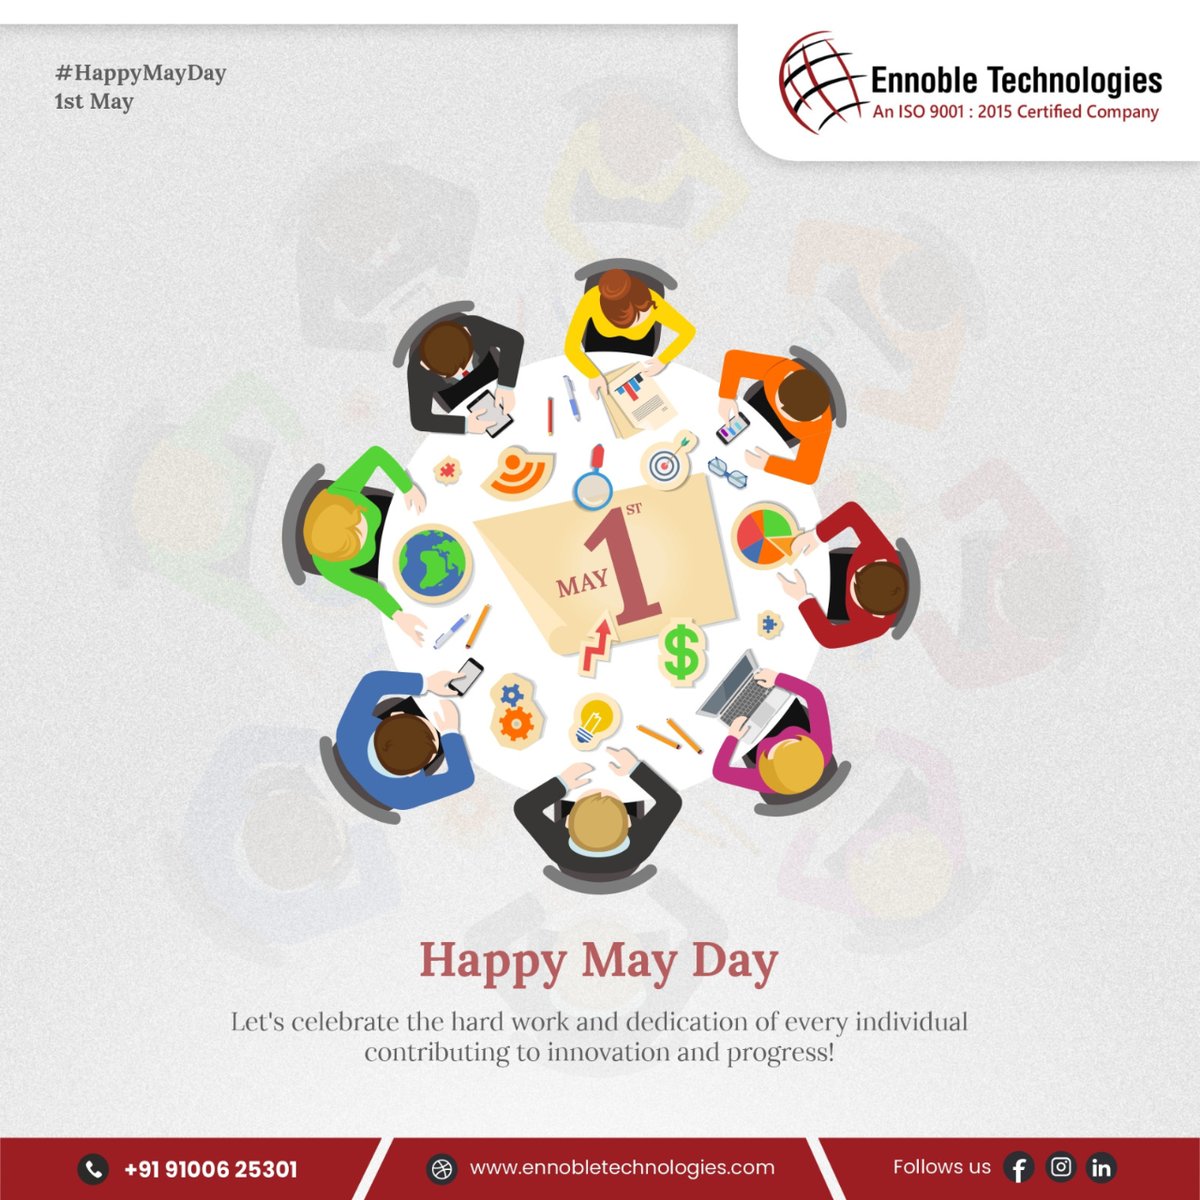 🌼 𝐇𝐚𝐩𝐩𝐲 𝐌𝐚𝐲 𝐃𝐚𝐲! 🌼

Happy May Day from #EnnobleTechnologies!🌍Today, we celebrate the spirit of #labor, #dedication, and innovation. Let's continue to empower minds, elevate opportunities, and Ennoble the world together!🚀